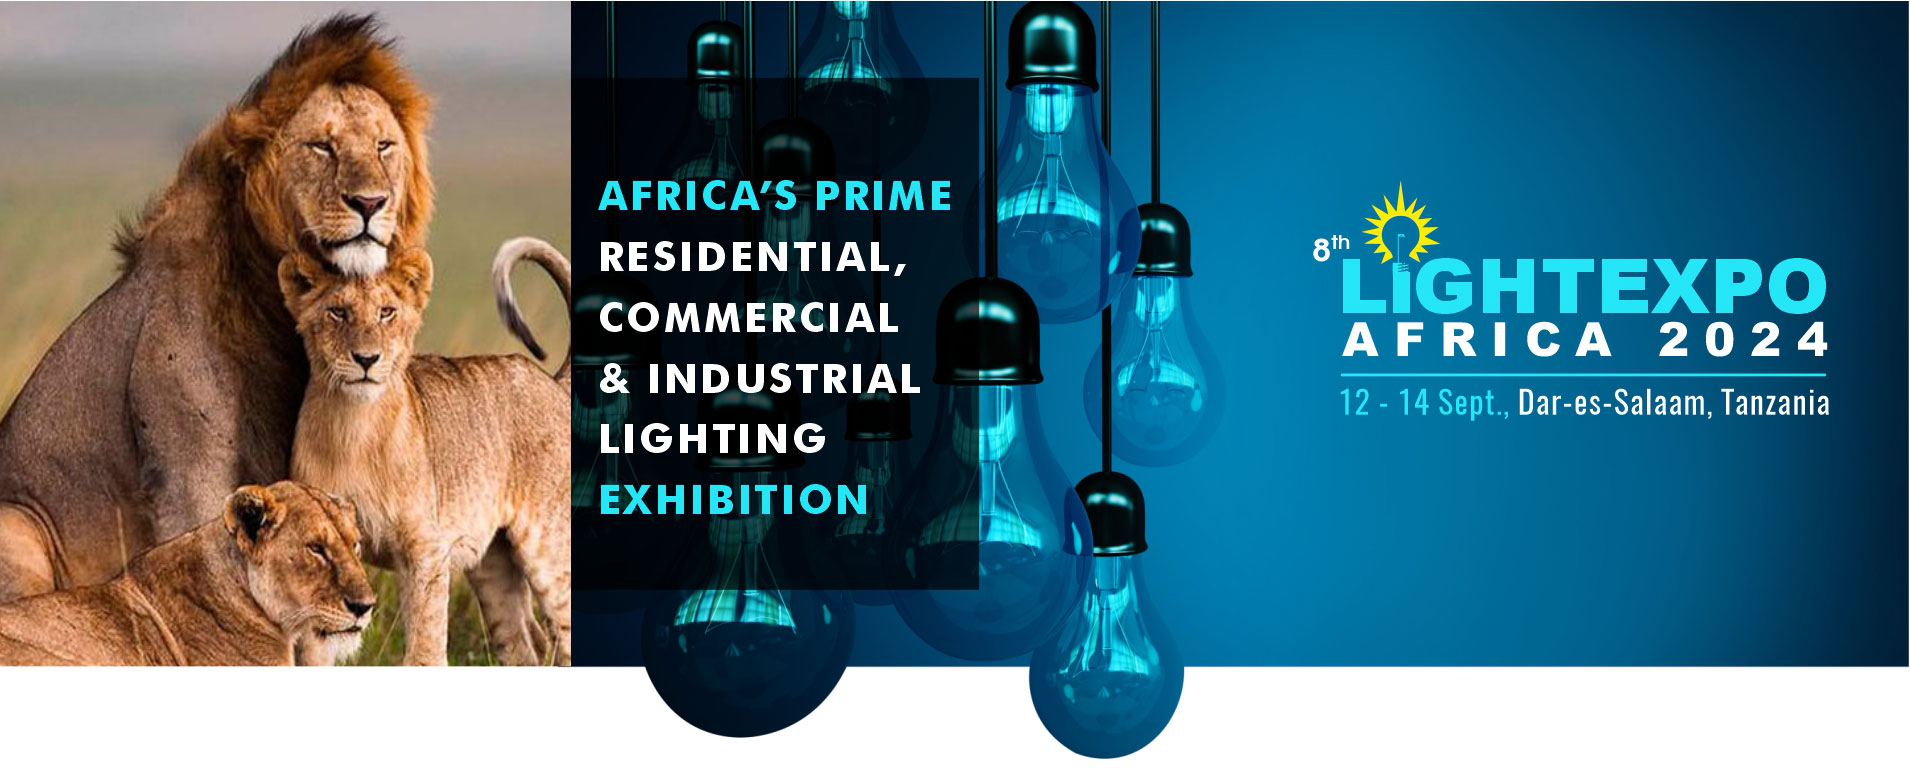 Lightexpo Tanzania 2024 - International RESIDENTIAL, COMMERCIAL & INDUSTRIAL LIGHTING Show Africa